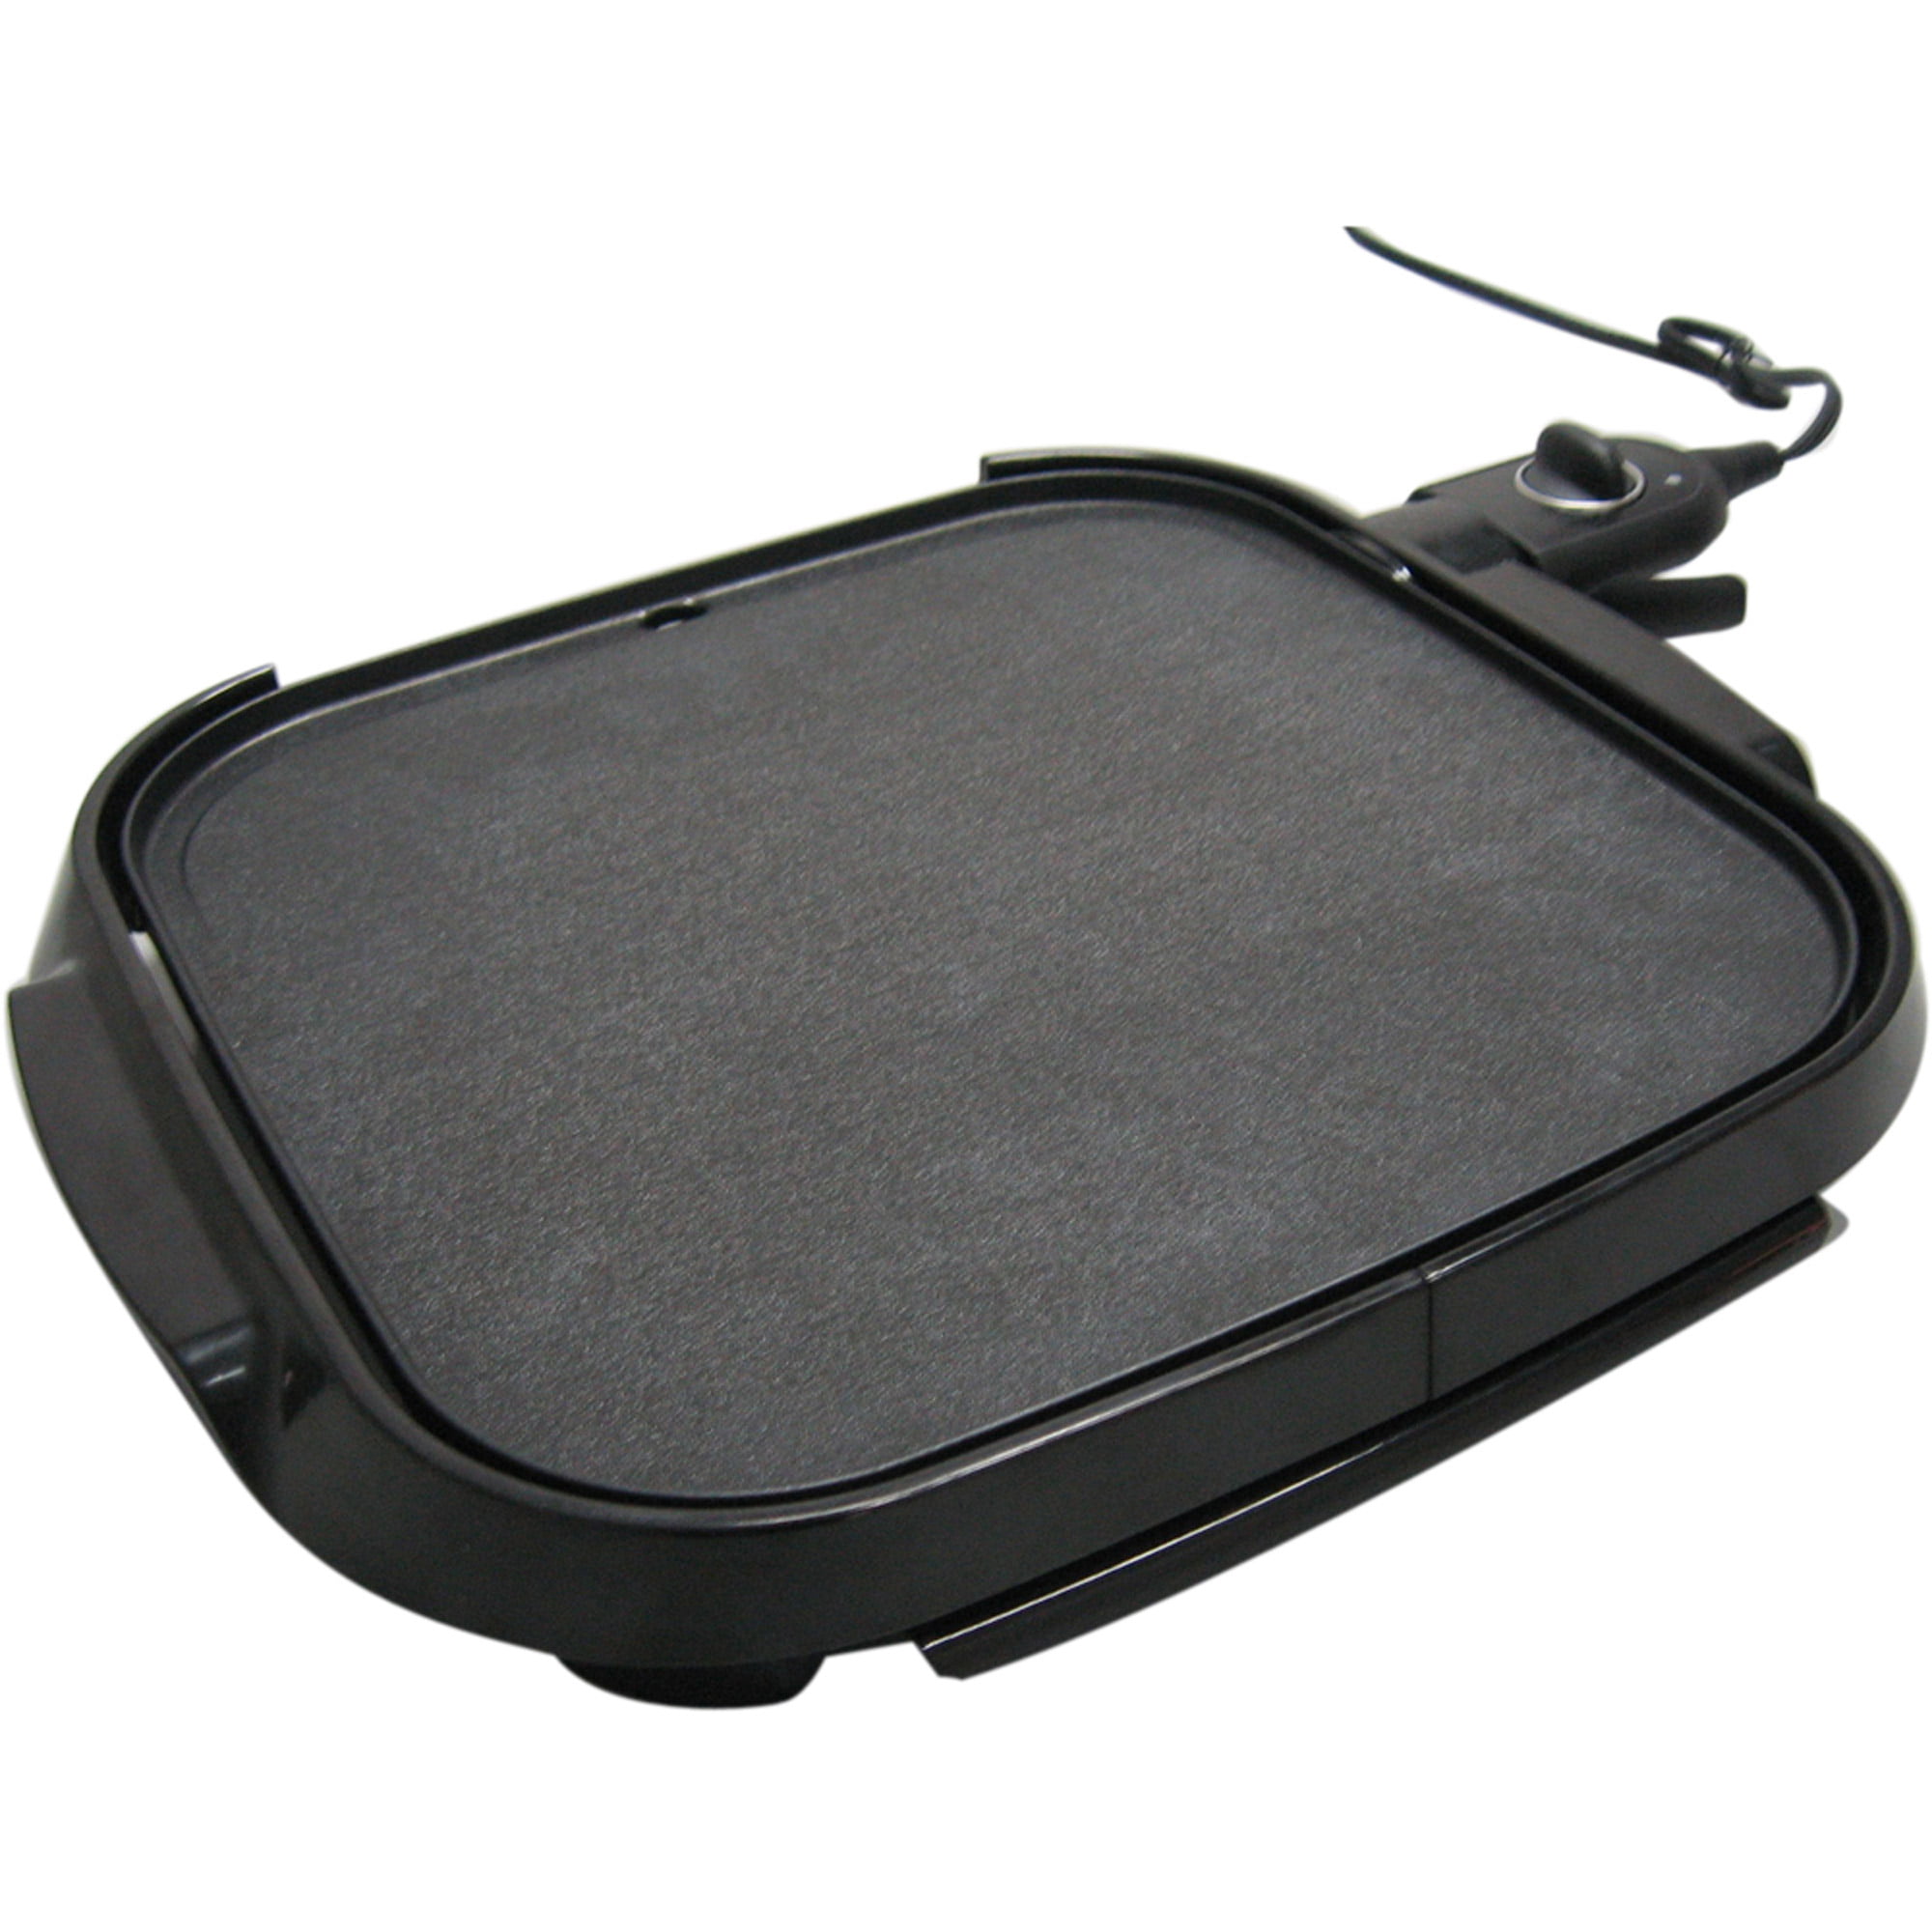 Farberware Royalty 3-in-1 Black Skillet, Grill & Griddle Cooking